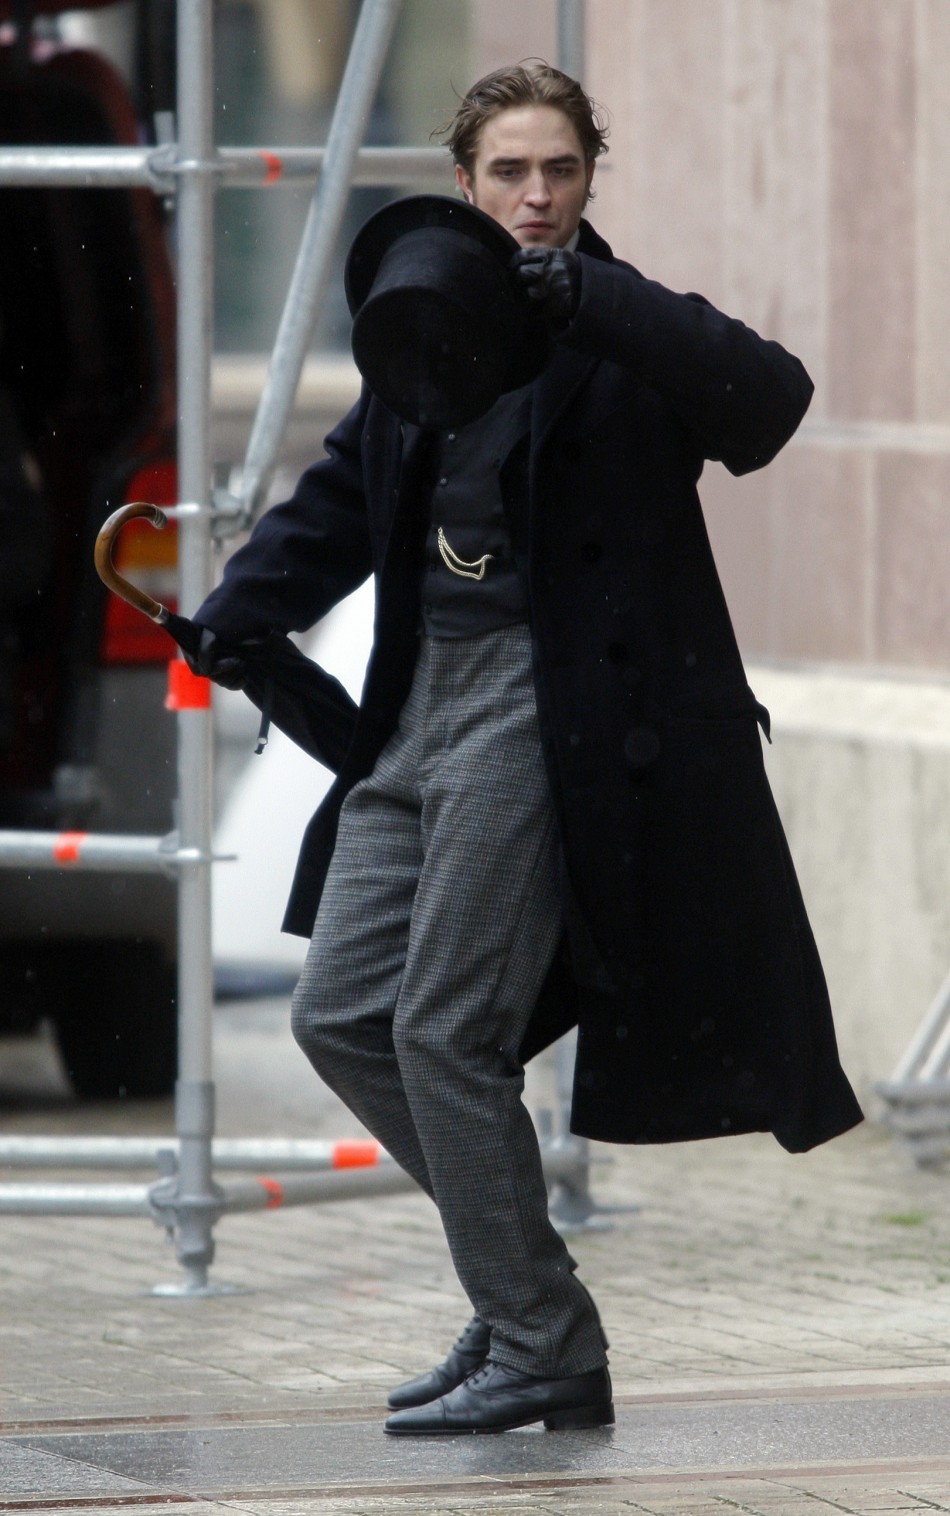 British actor Robert Pattinson is seen during the filming of a scene in his new movie, Bel Ami, in Budapest April 6, 2010.